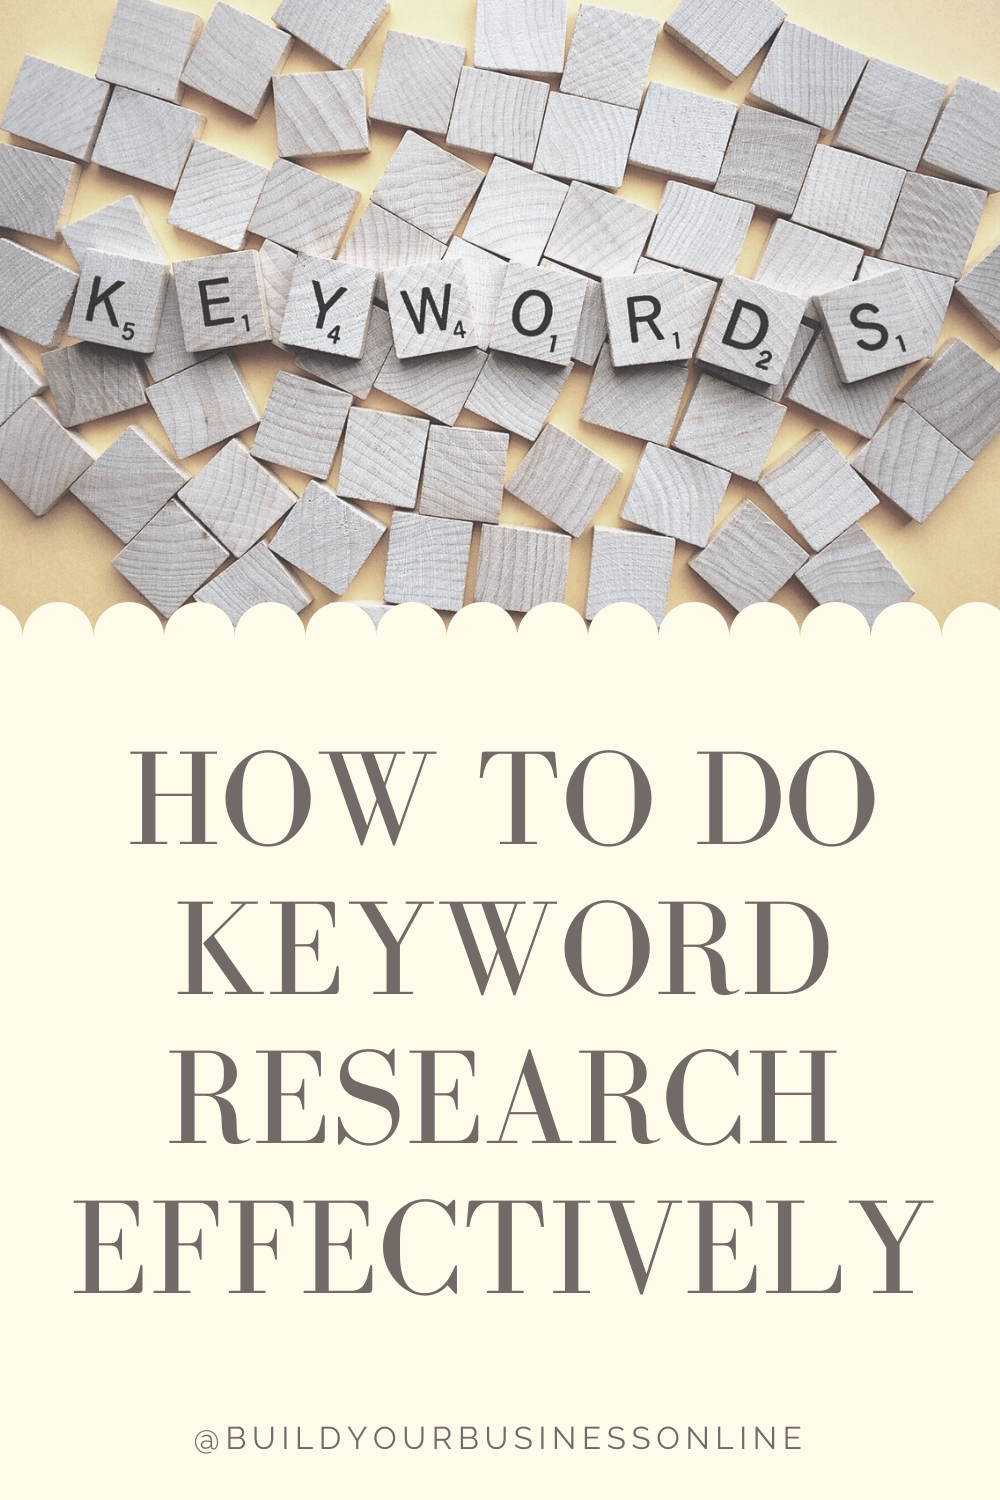 How to do keyword research effectively